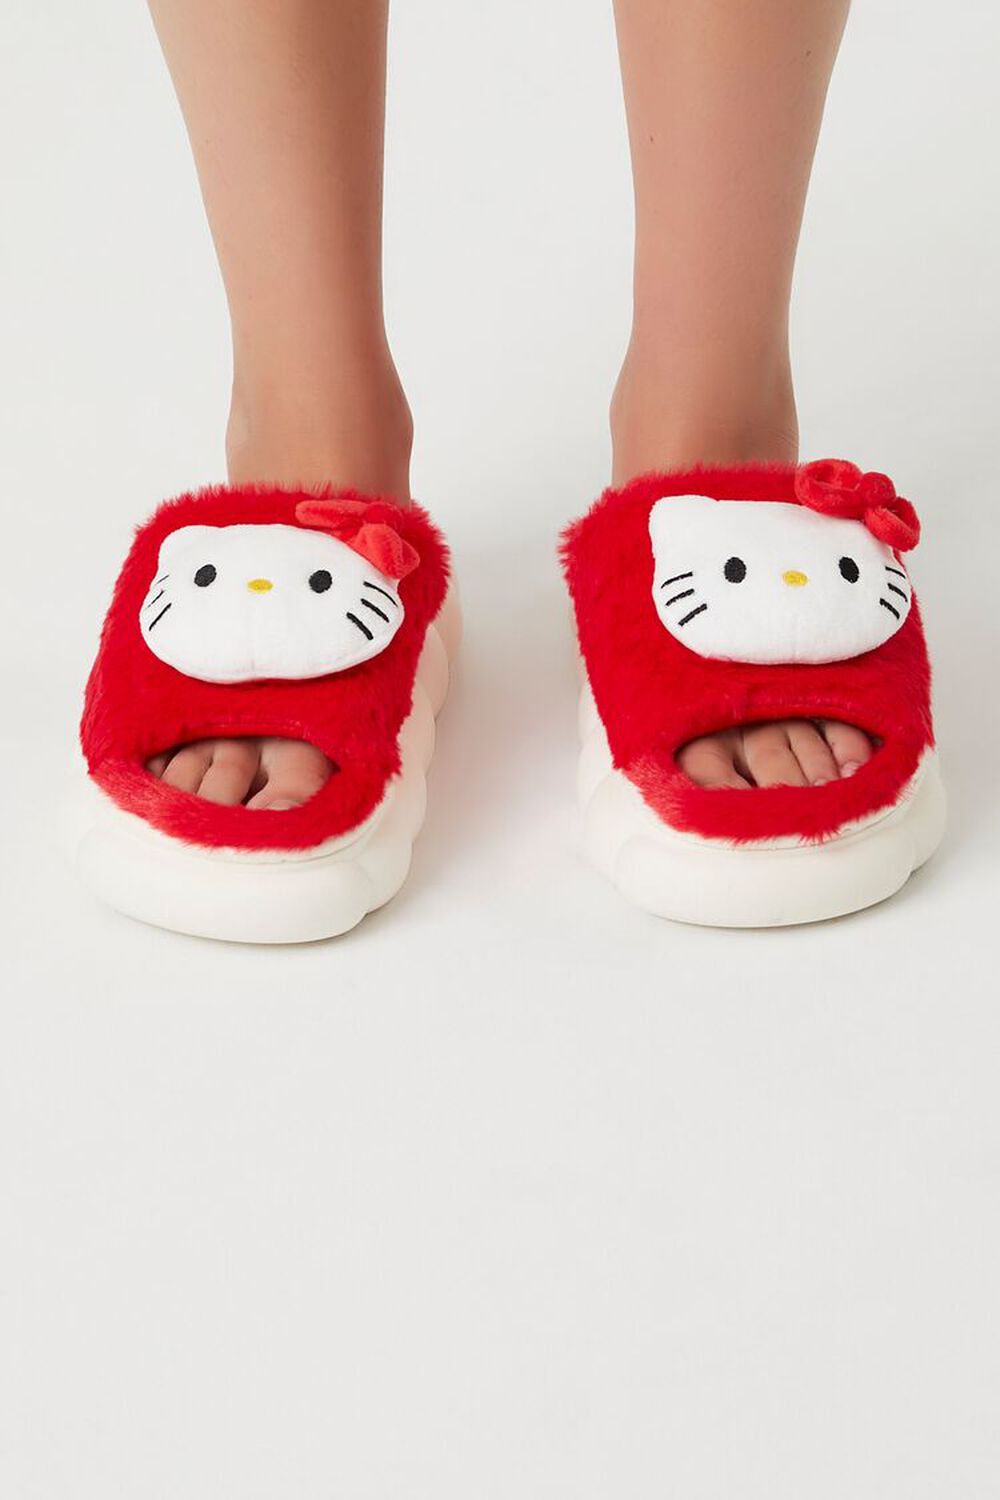 RED/WHITE Hello Kitty Plush House Slippers, image 3